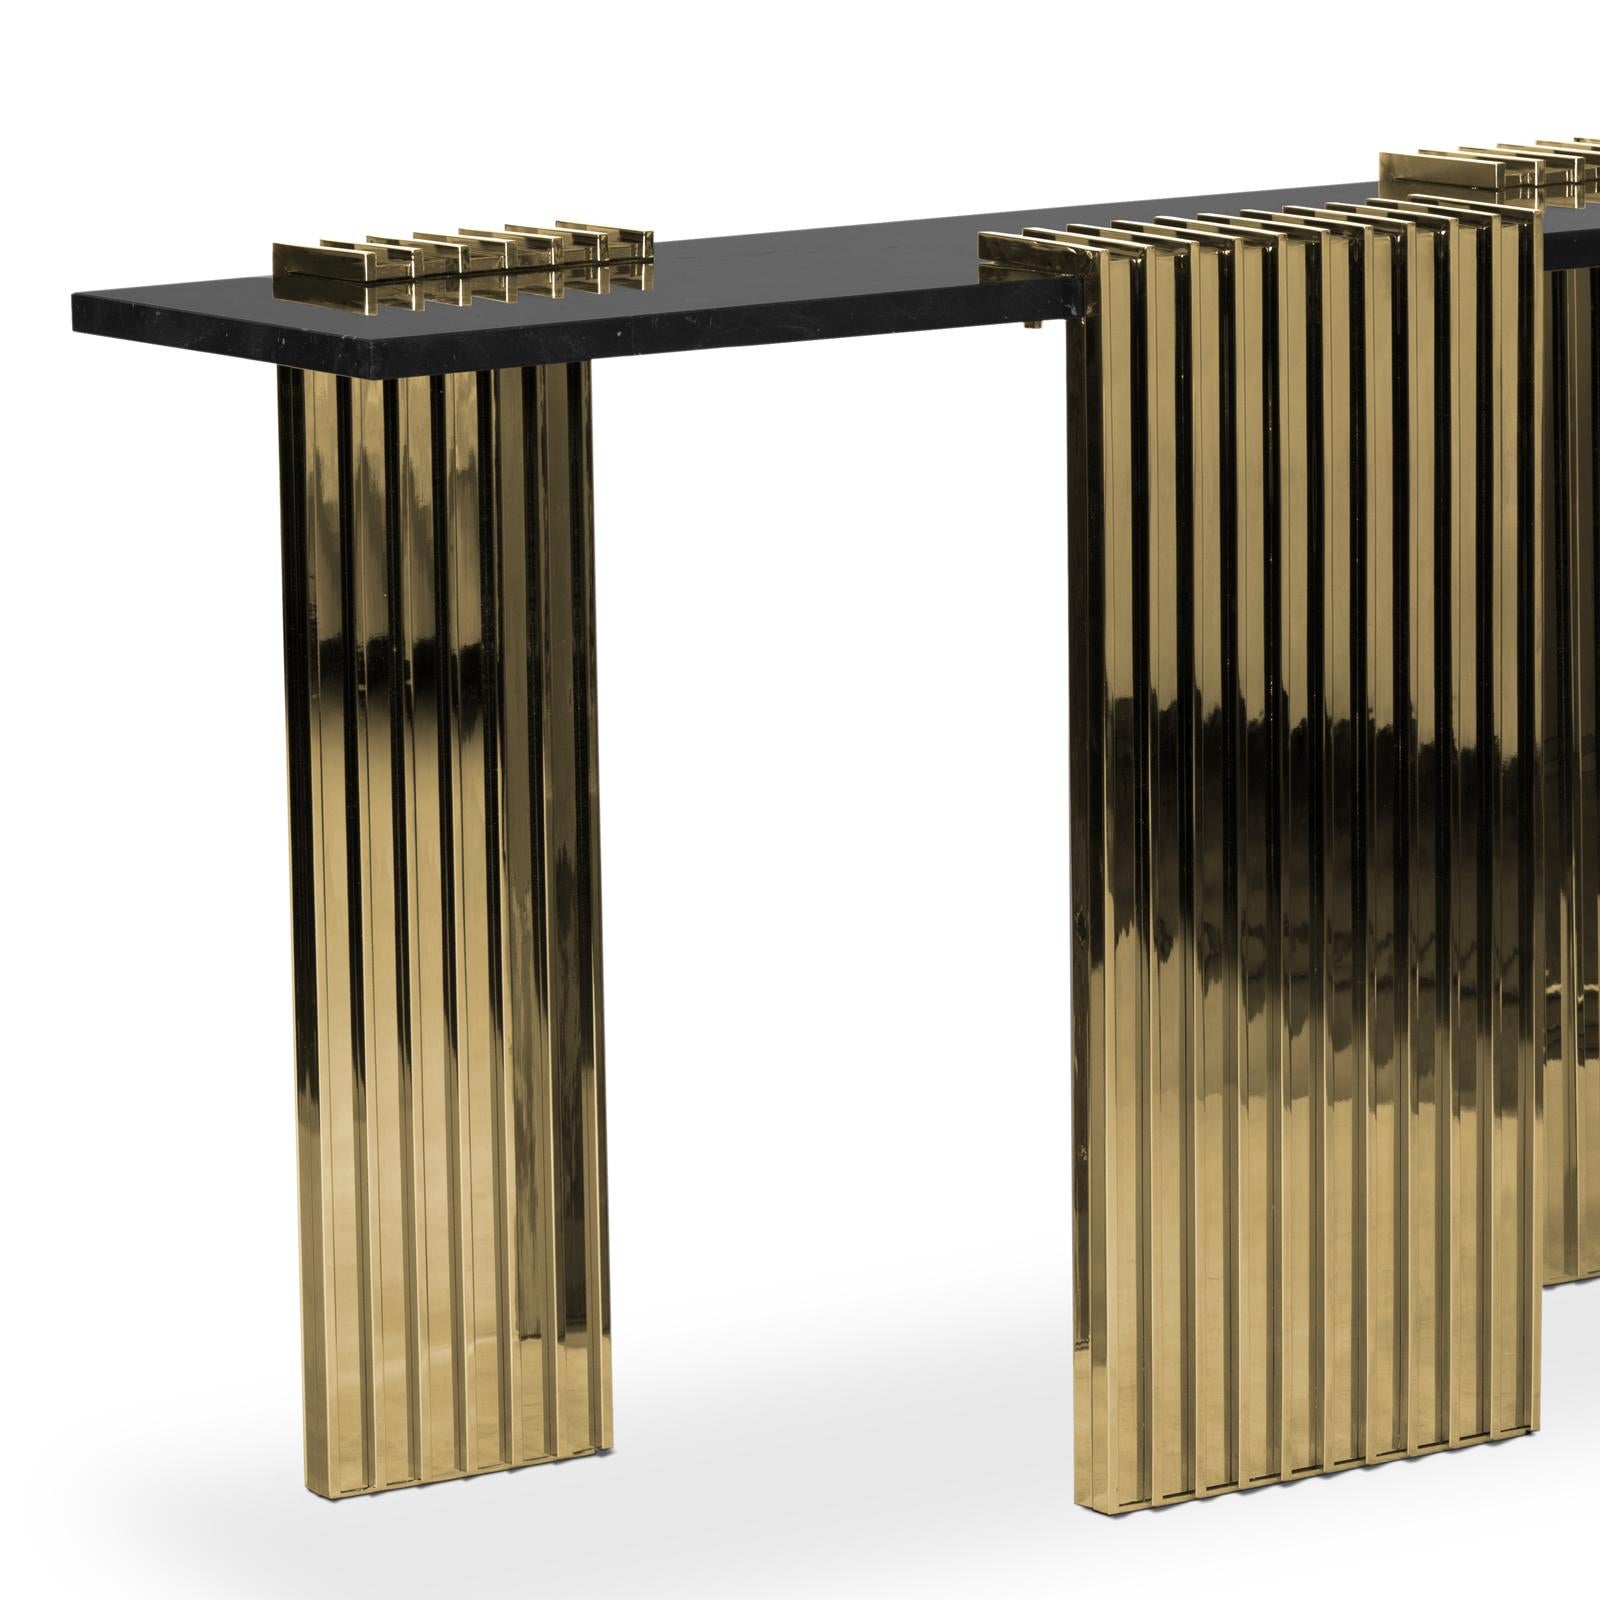 Console table oldies with 3 feet base in
gold plated solid polished brass. With black marble top.
Also available in oldies coffee table.